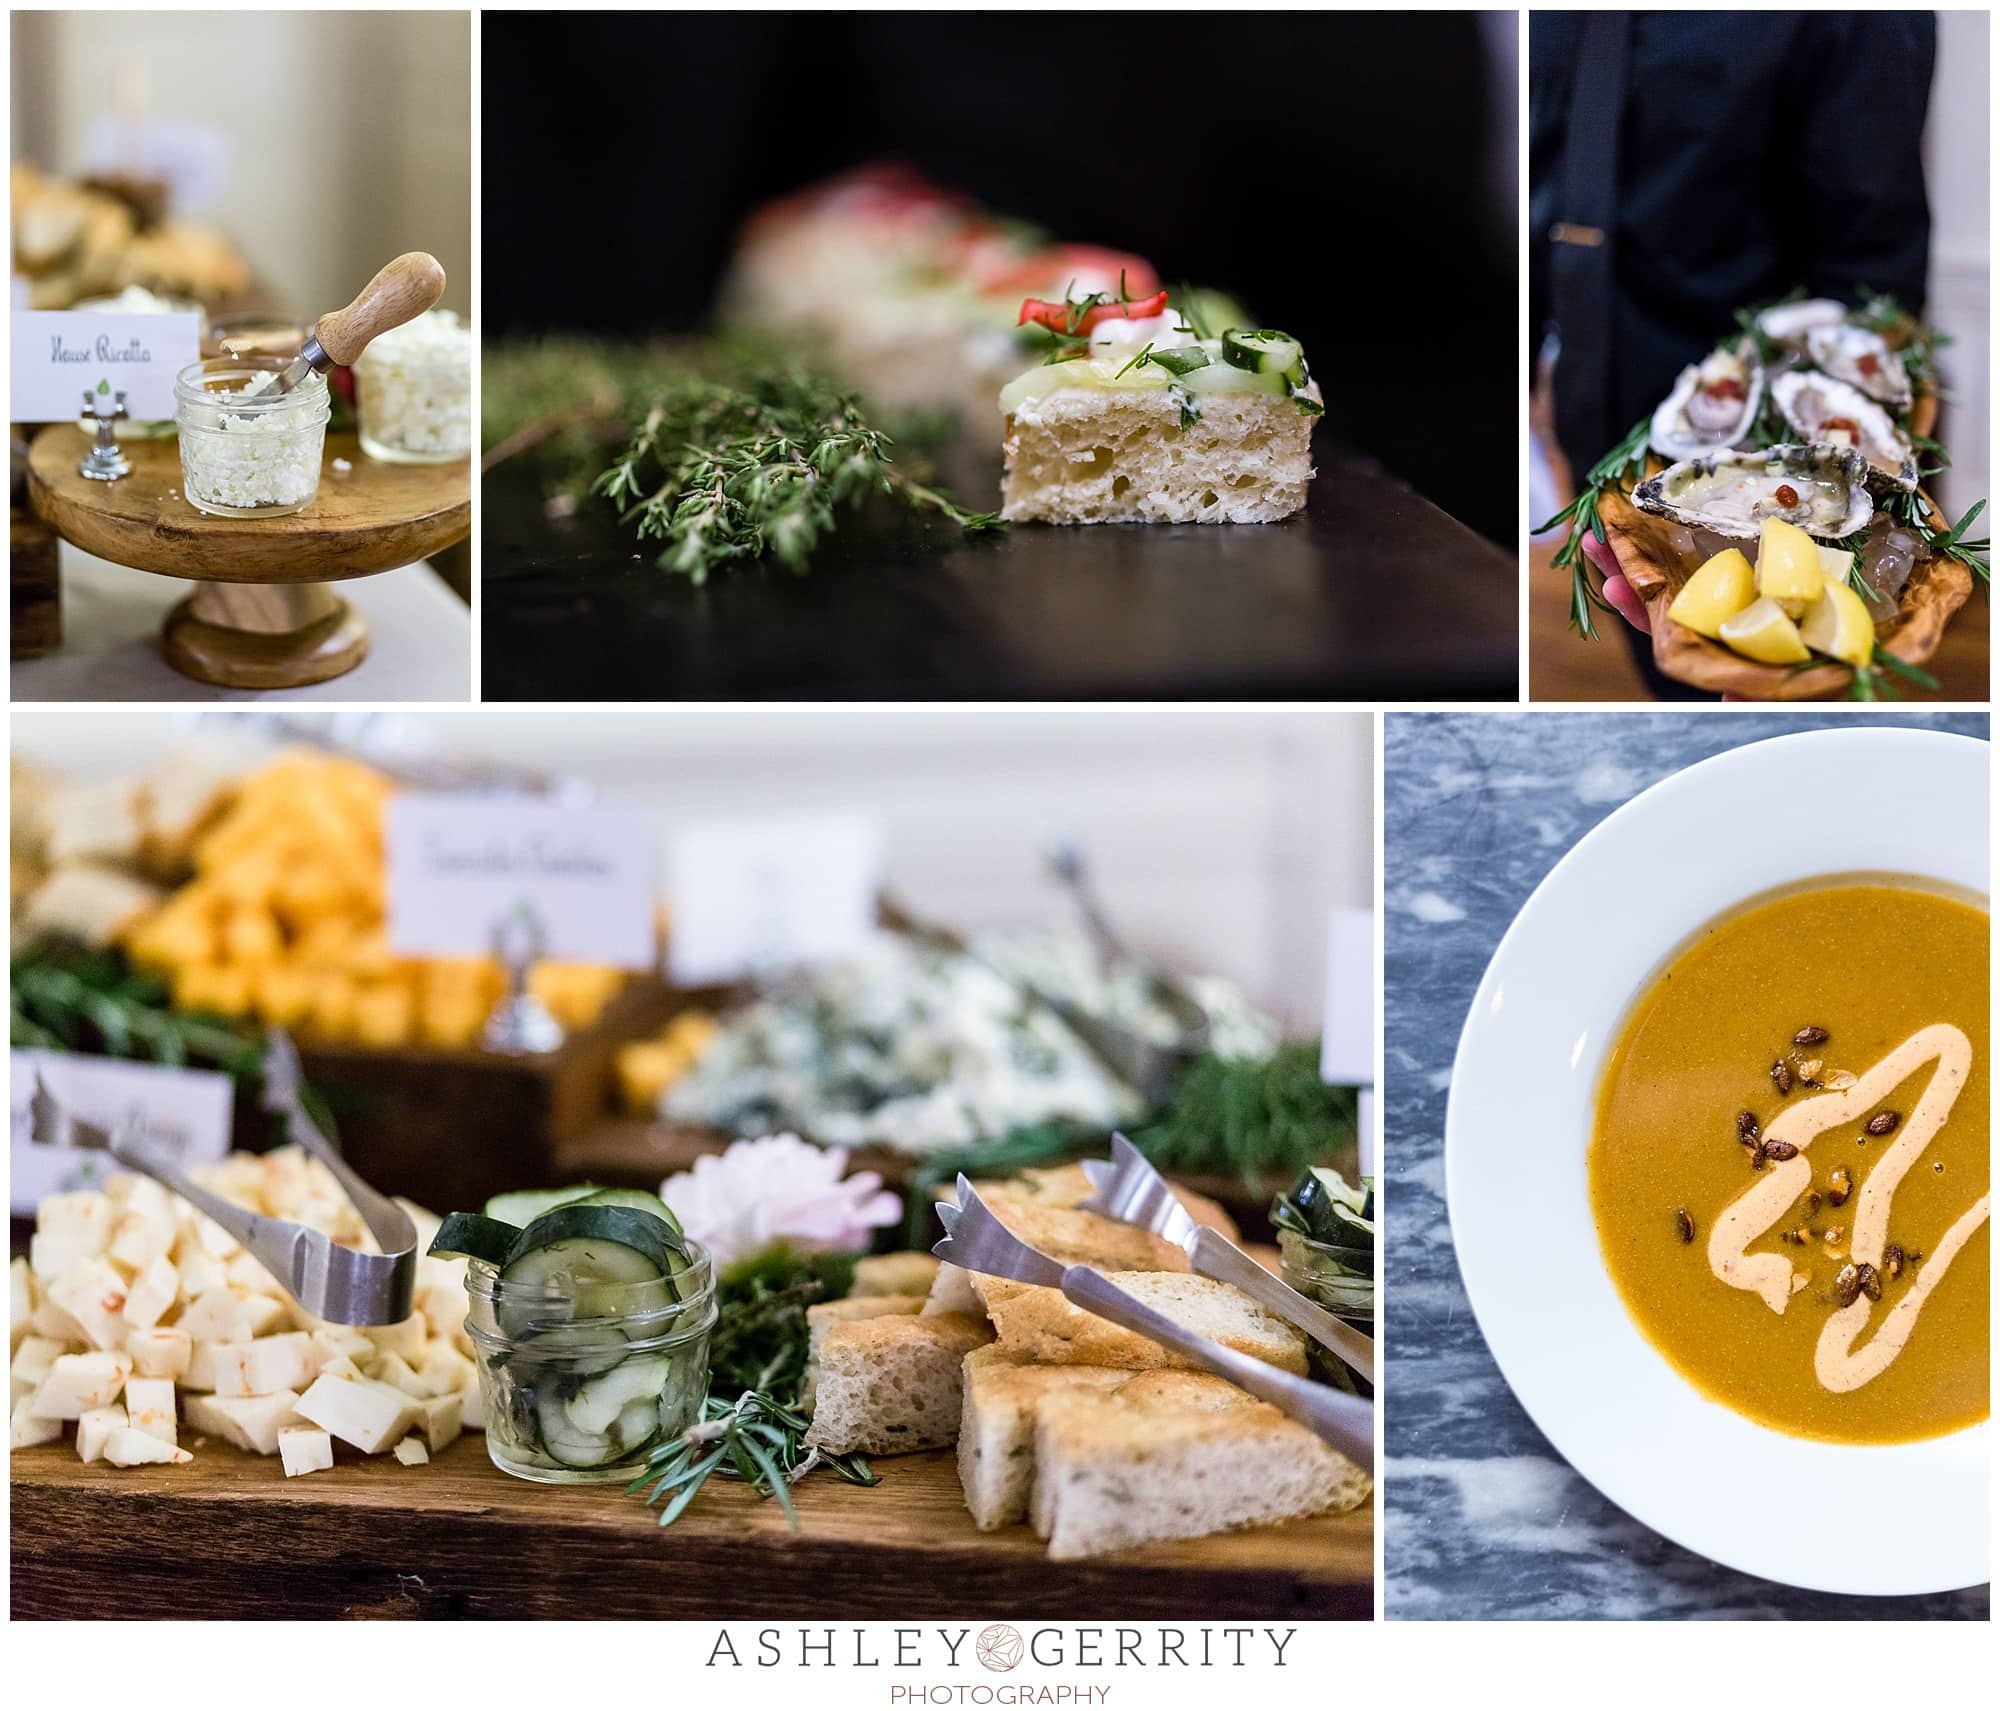 birch tree catering is a Philadelphia-based seasonally inspired caterer that regularly works at the Colonial Dames, featuring seasonal butternut squash bisque, a diverse cheese selection and perfect hors d'oevres.